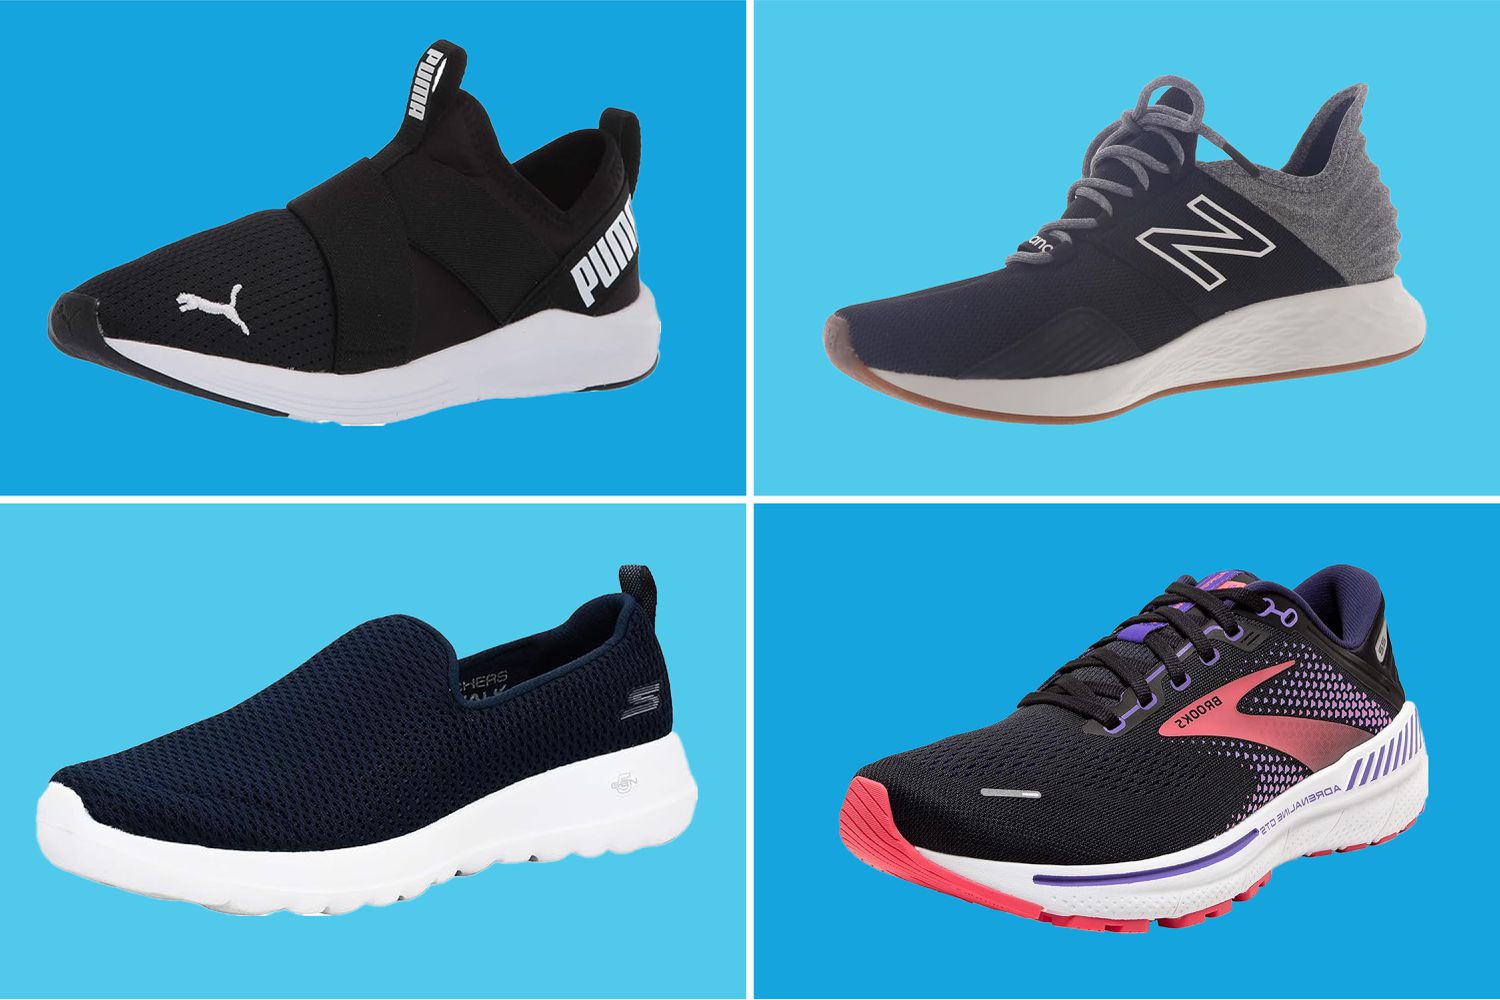 Nurse-Approved Comfortable Sneakers Are on Sale at Amazon [Video]